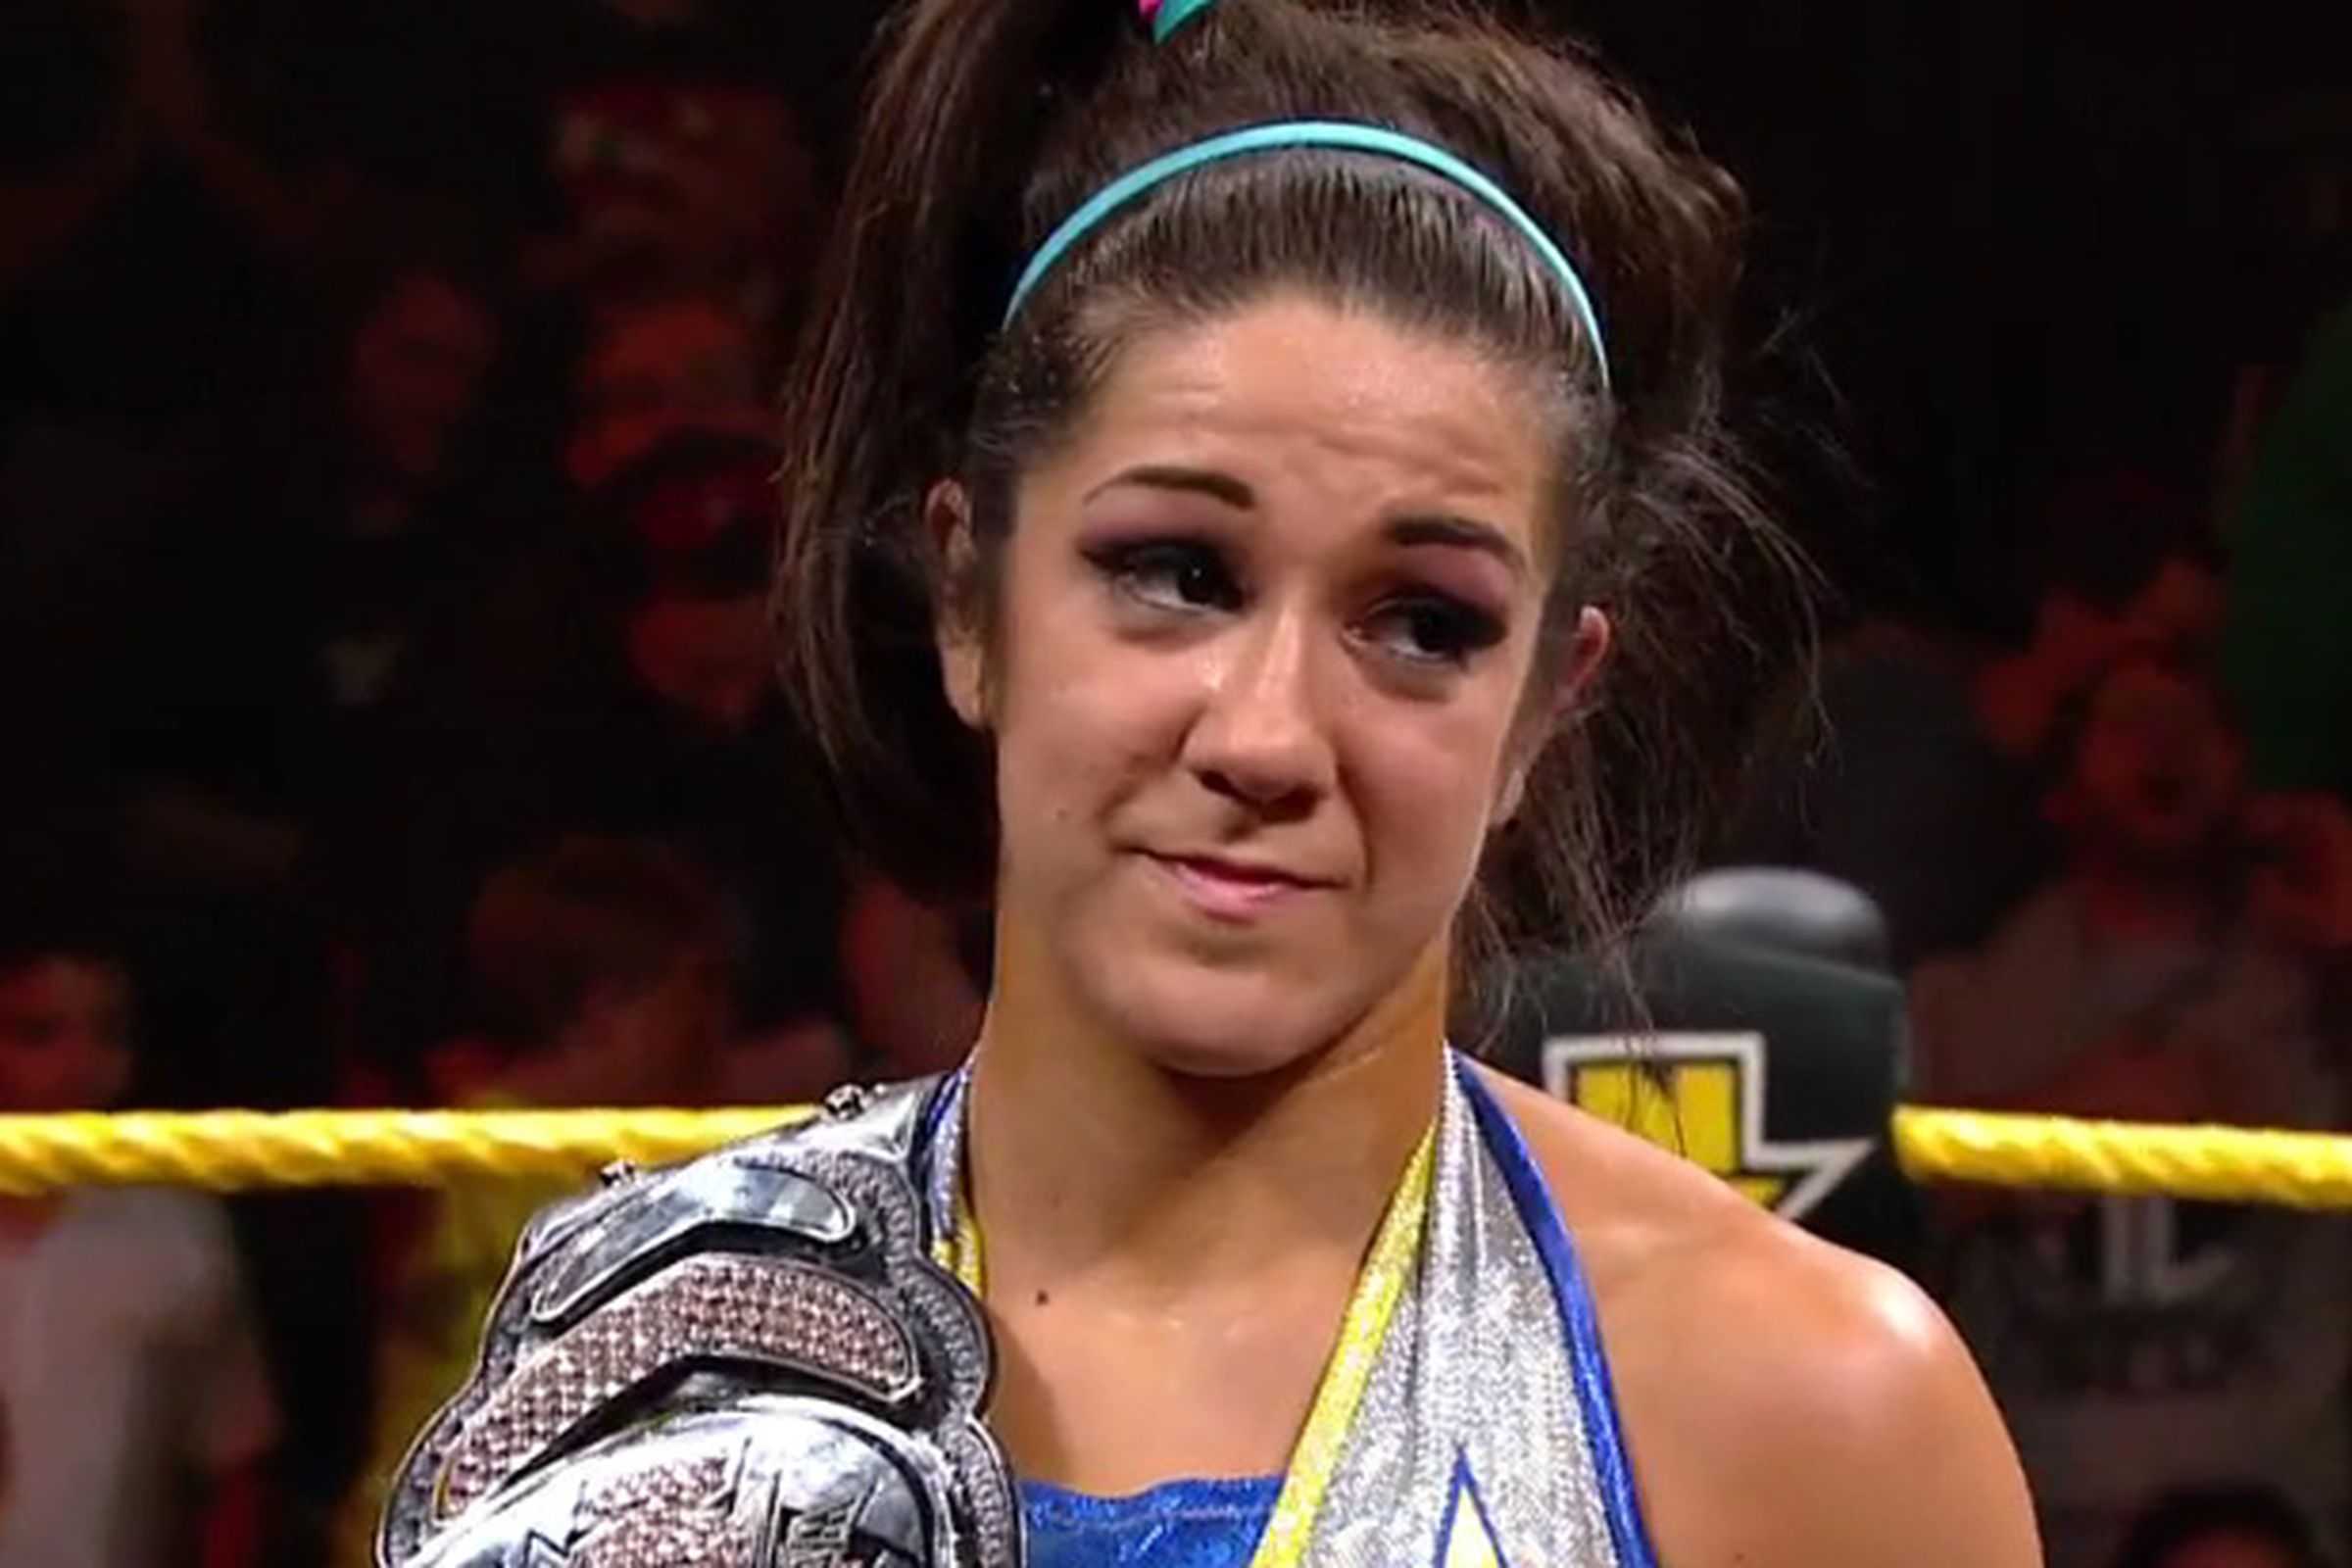 70+ Hot Pictures Of Bayley Will Hypnotise You With Her Exquisite Body 14